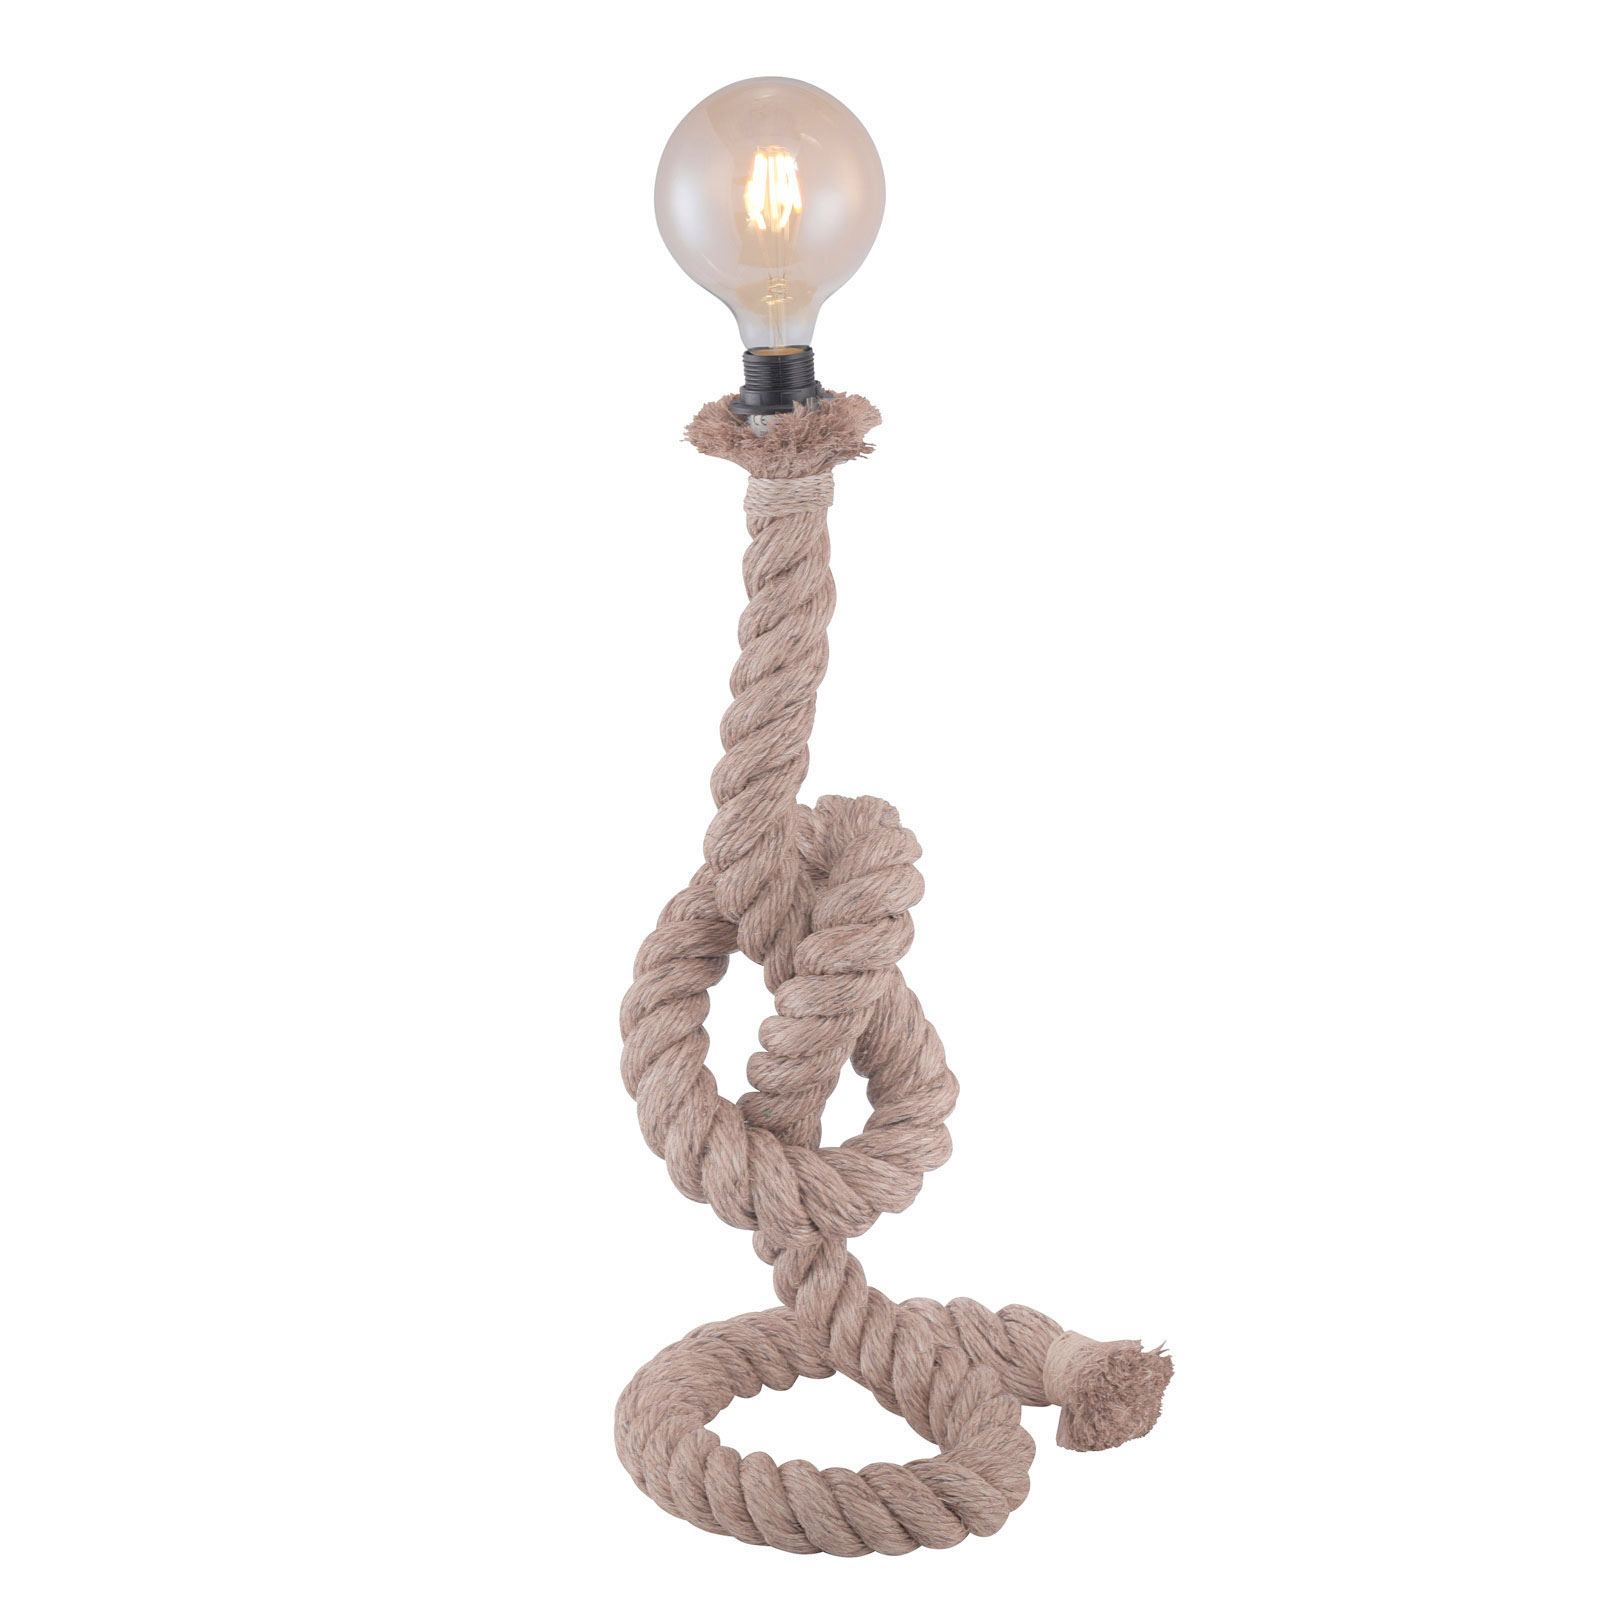 Rope table lamp made of thick rope